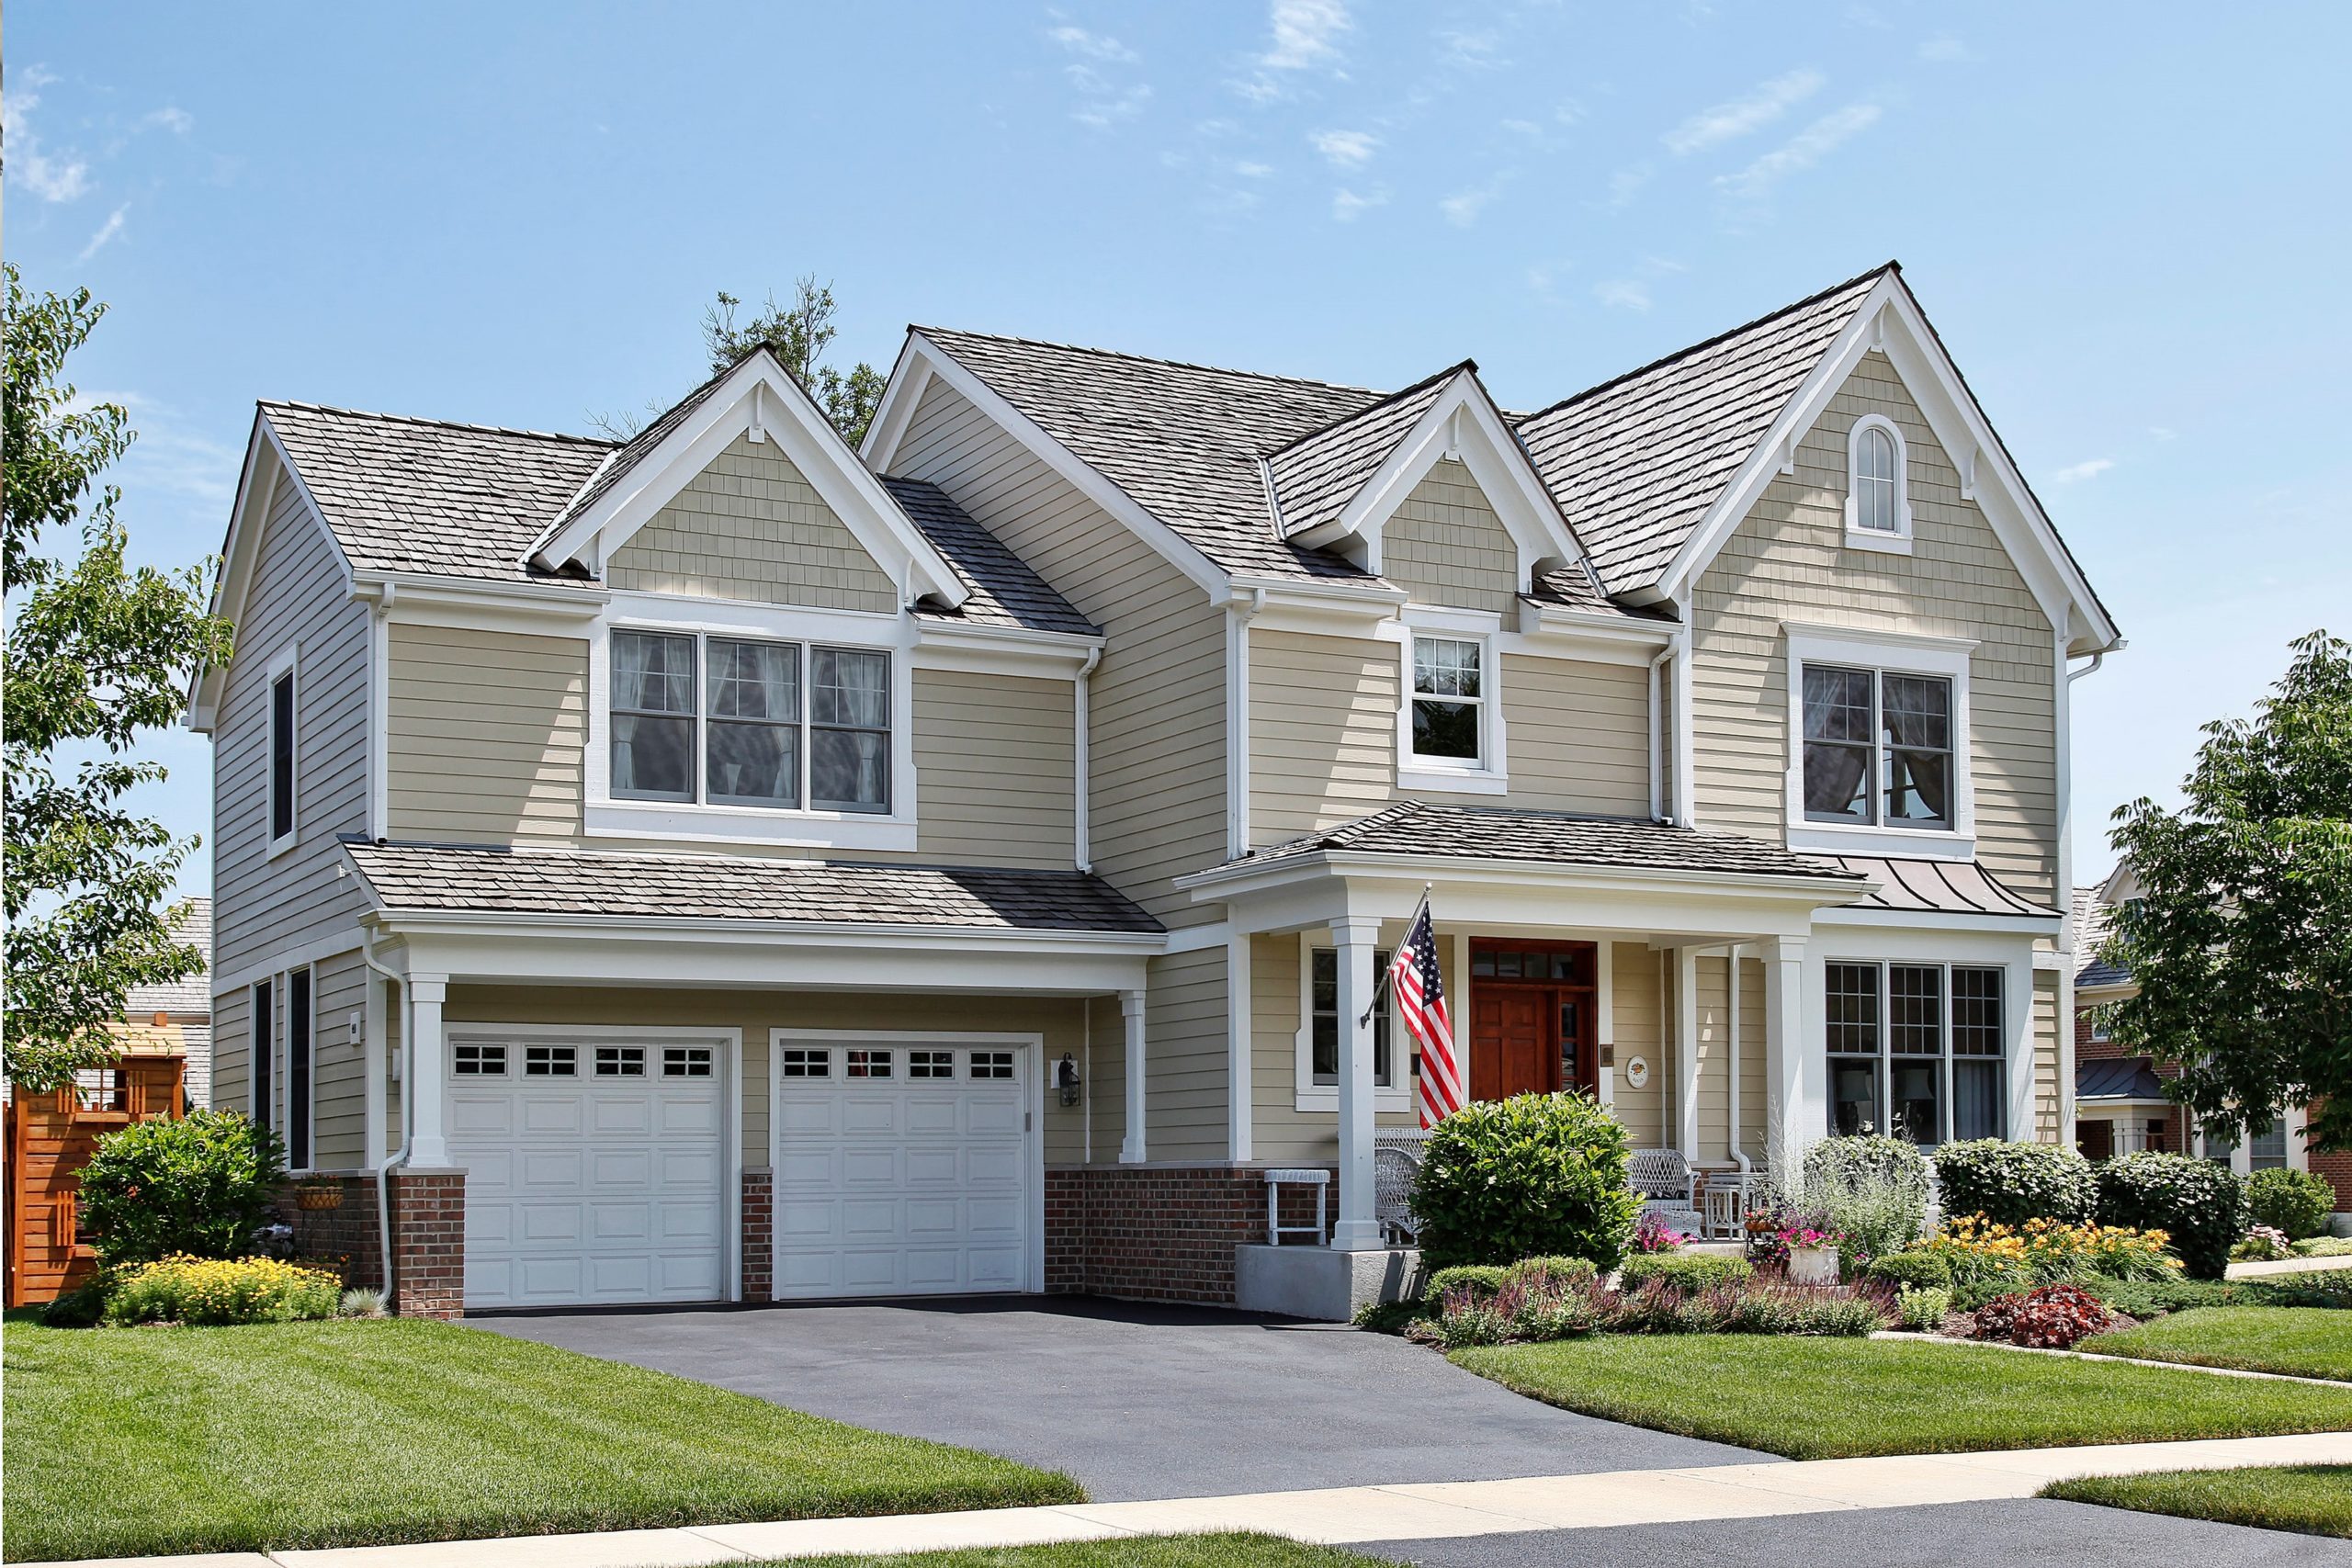 The Importance of Finding a Professional Siding Company